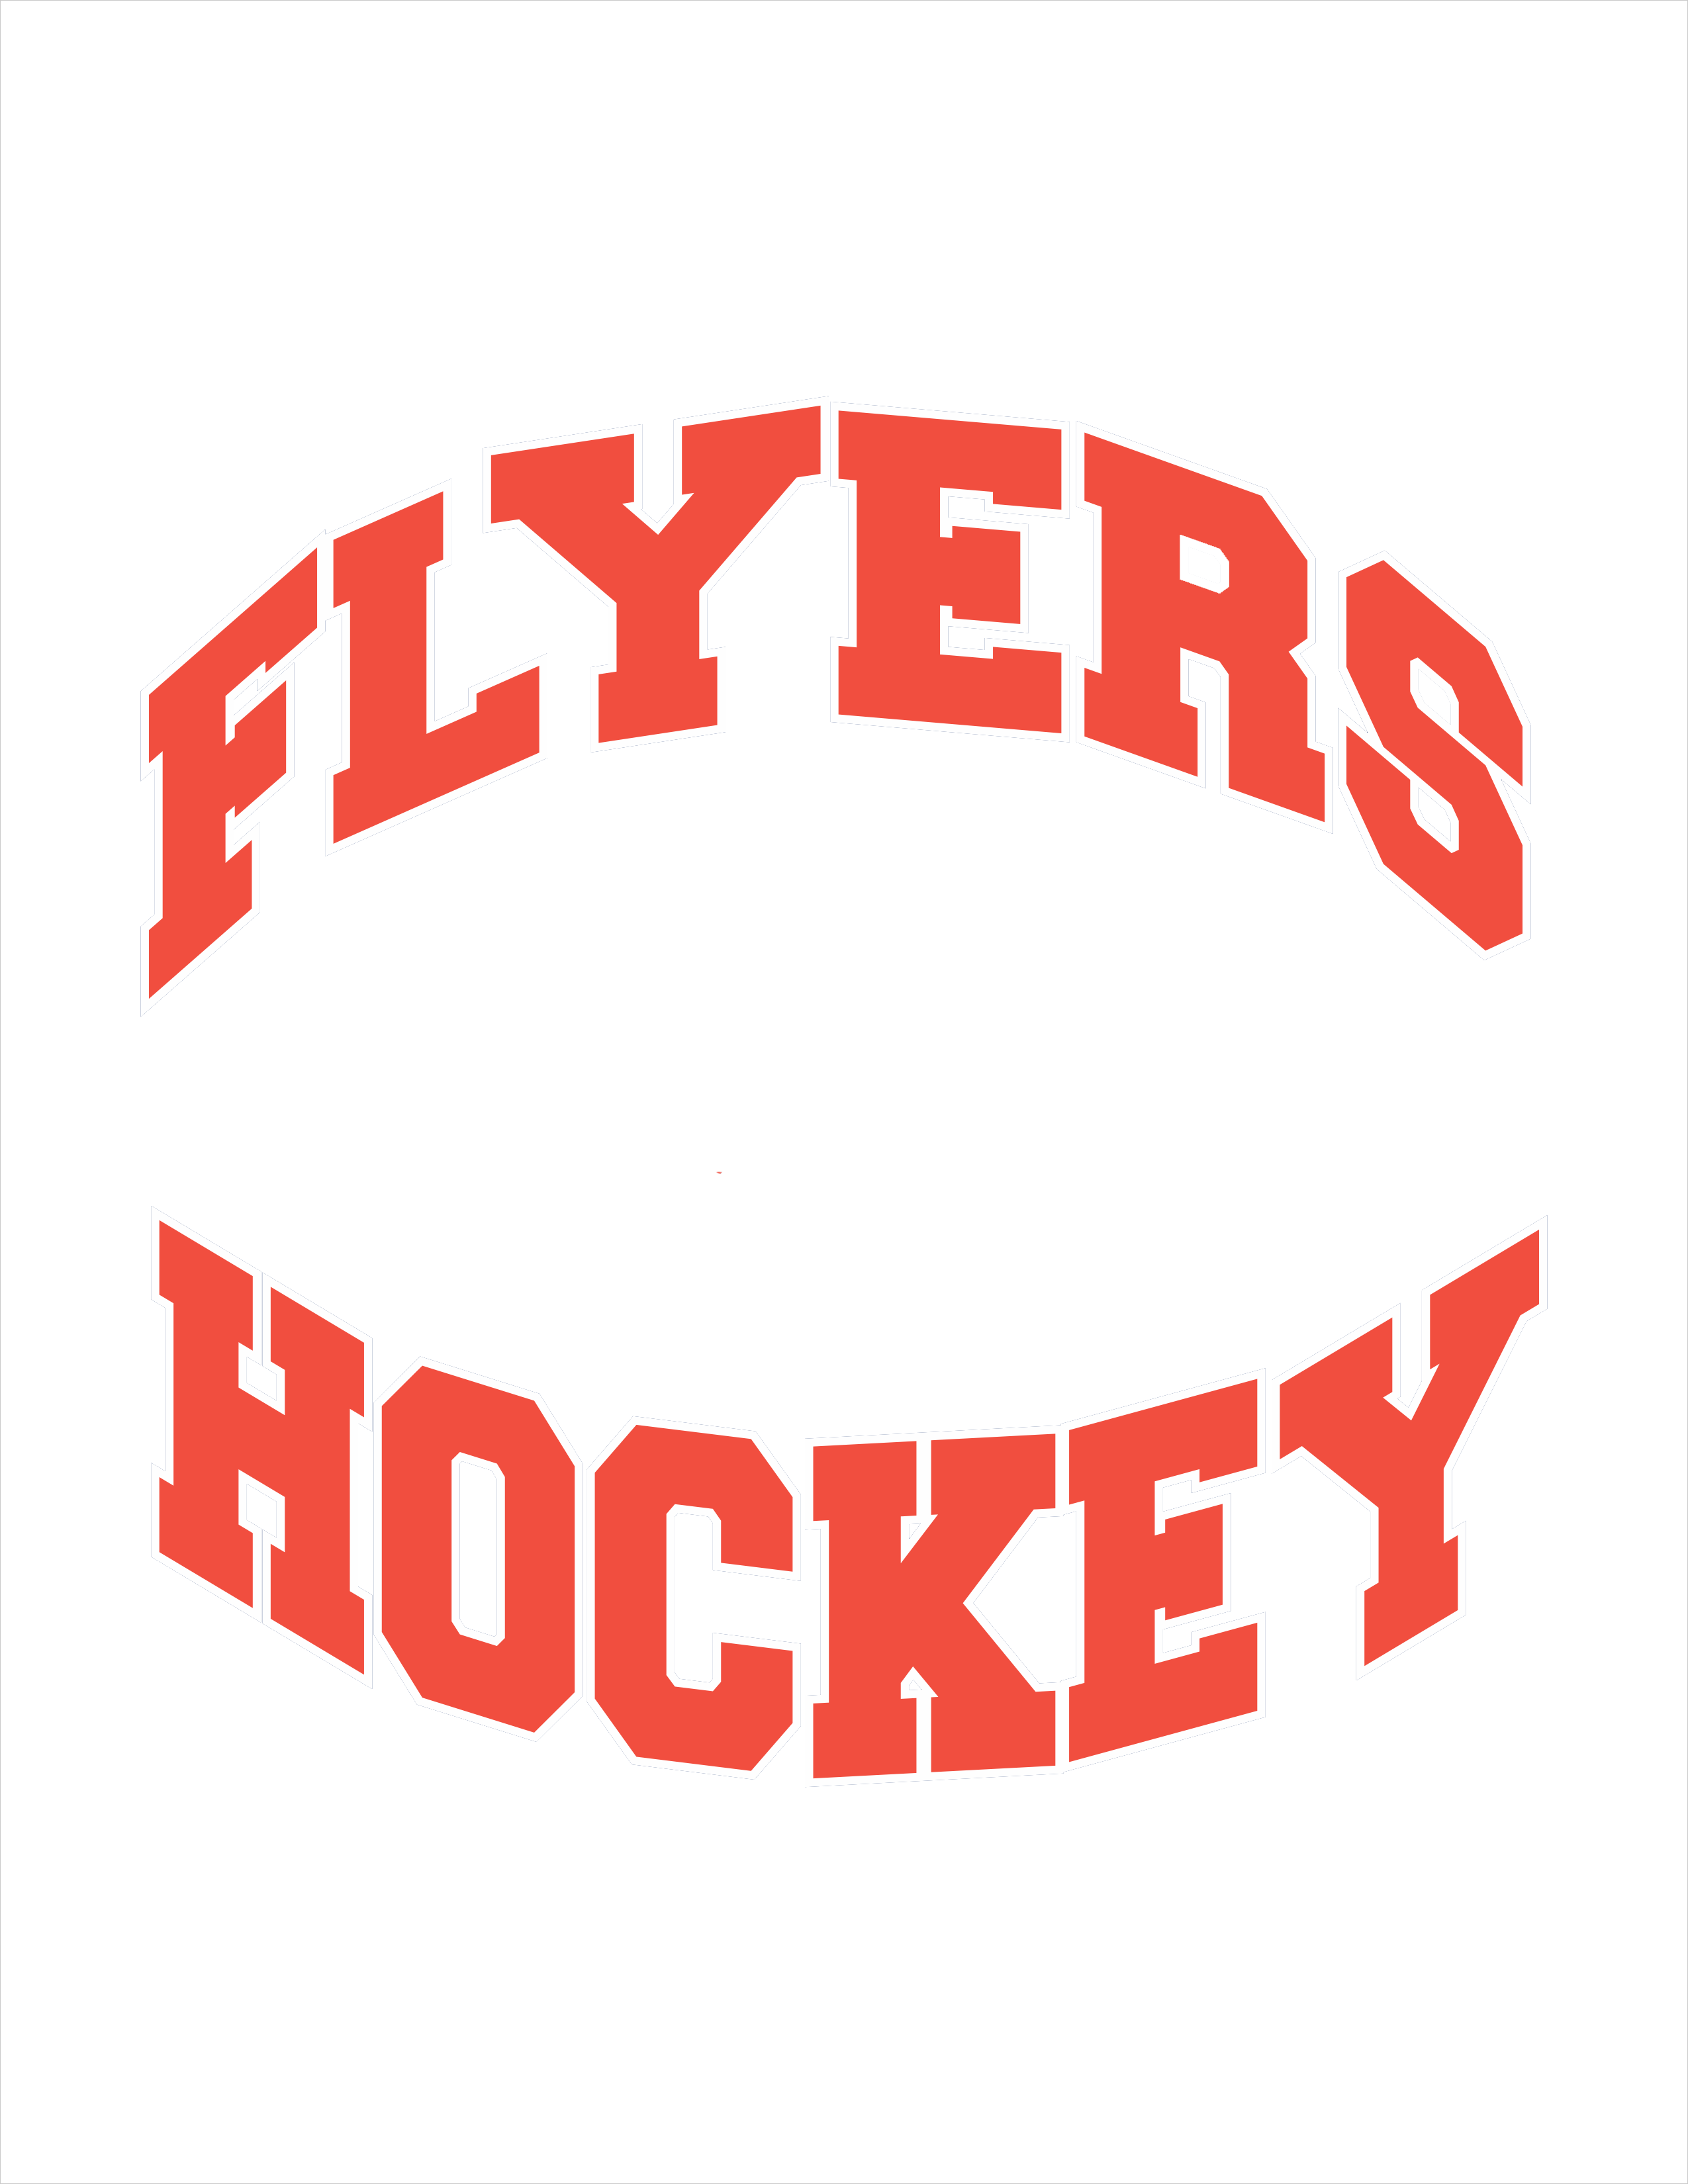 Sioux Falls Flyers